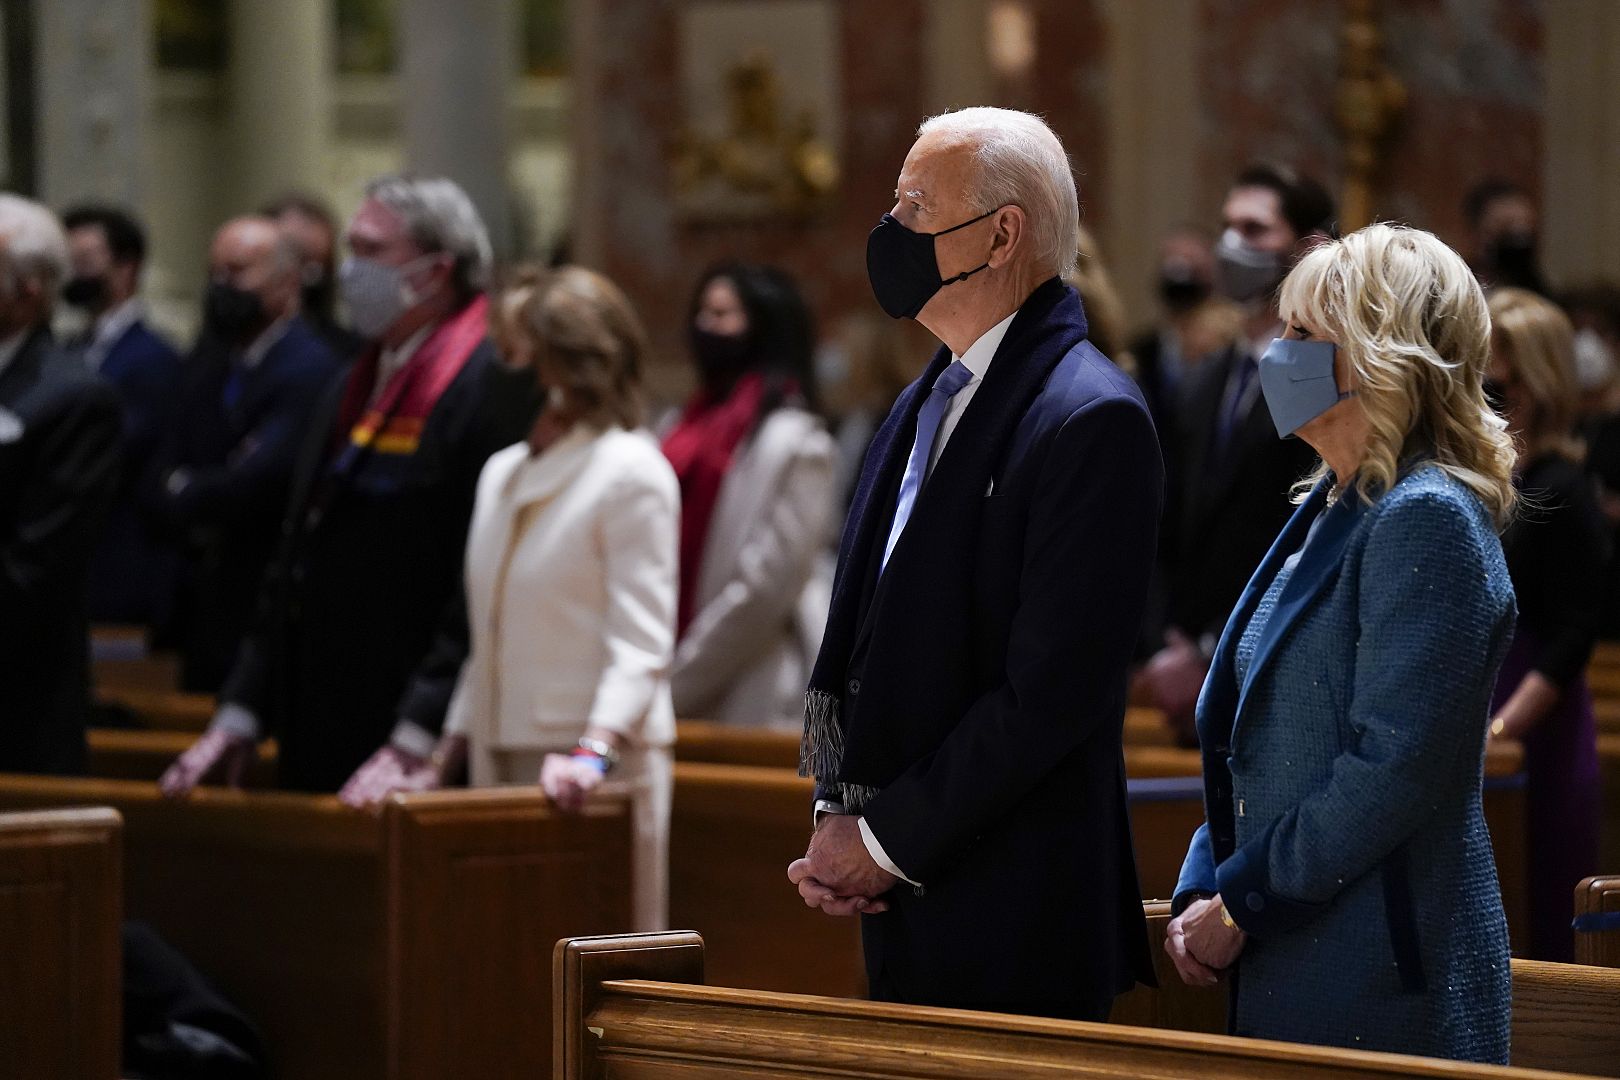 President-elect Joe Biden and his wife Jill Biden attend Mass at the Cathedral of St. Matthew the Apostle during Inauguration Day ceremonies. January 20, 2021